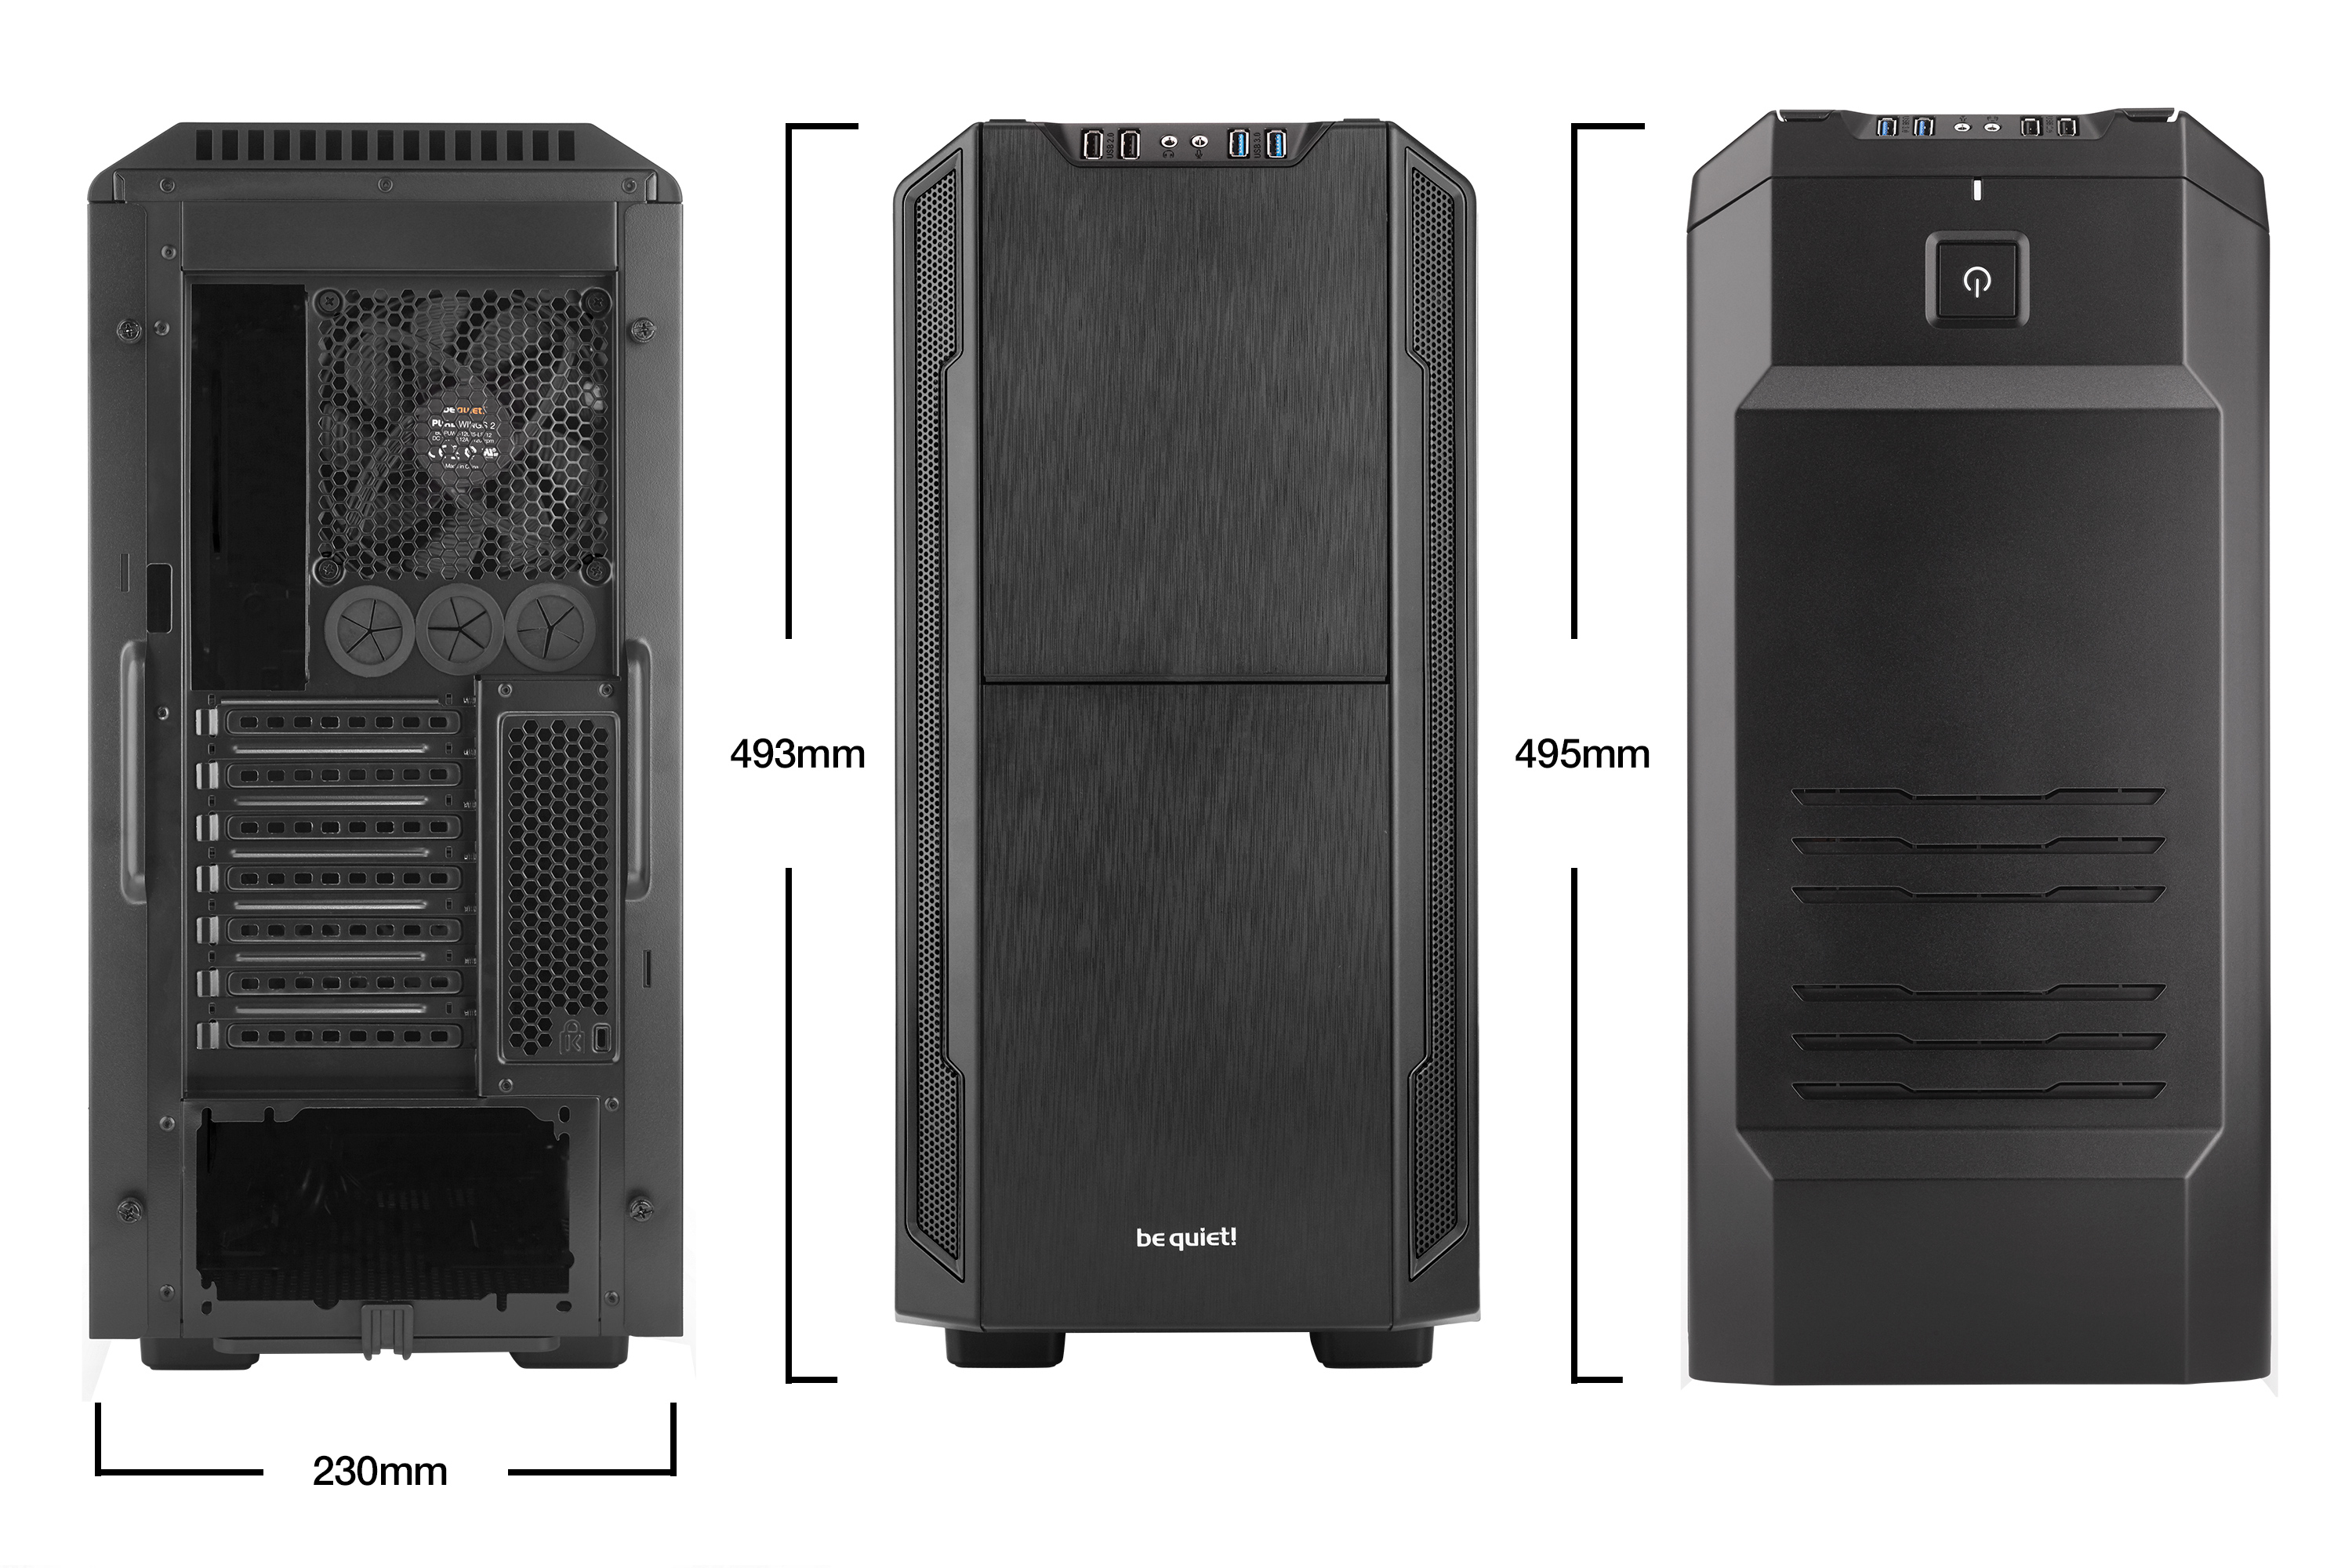 be quiet! Silent Base 600 Window Black, 495 x 230 x 493, IO-panel 2x USB 3.0, 2x USB 2.0, HD Audio, 3x 5,25, 3x 3,5, 3x 2,5, inc 1x 140 mm en 1x 120 mm fan, dual air channel cooling,